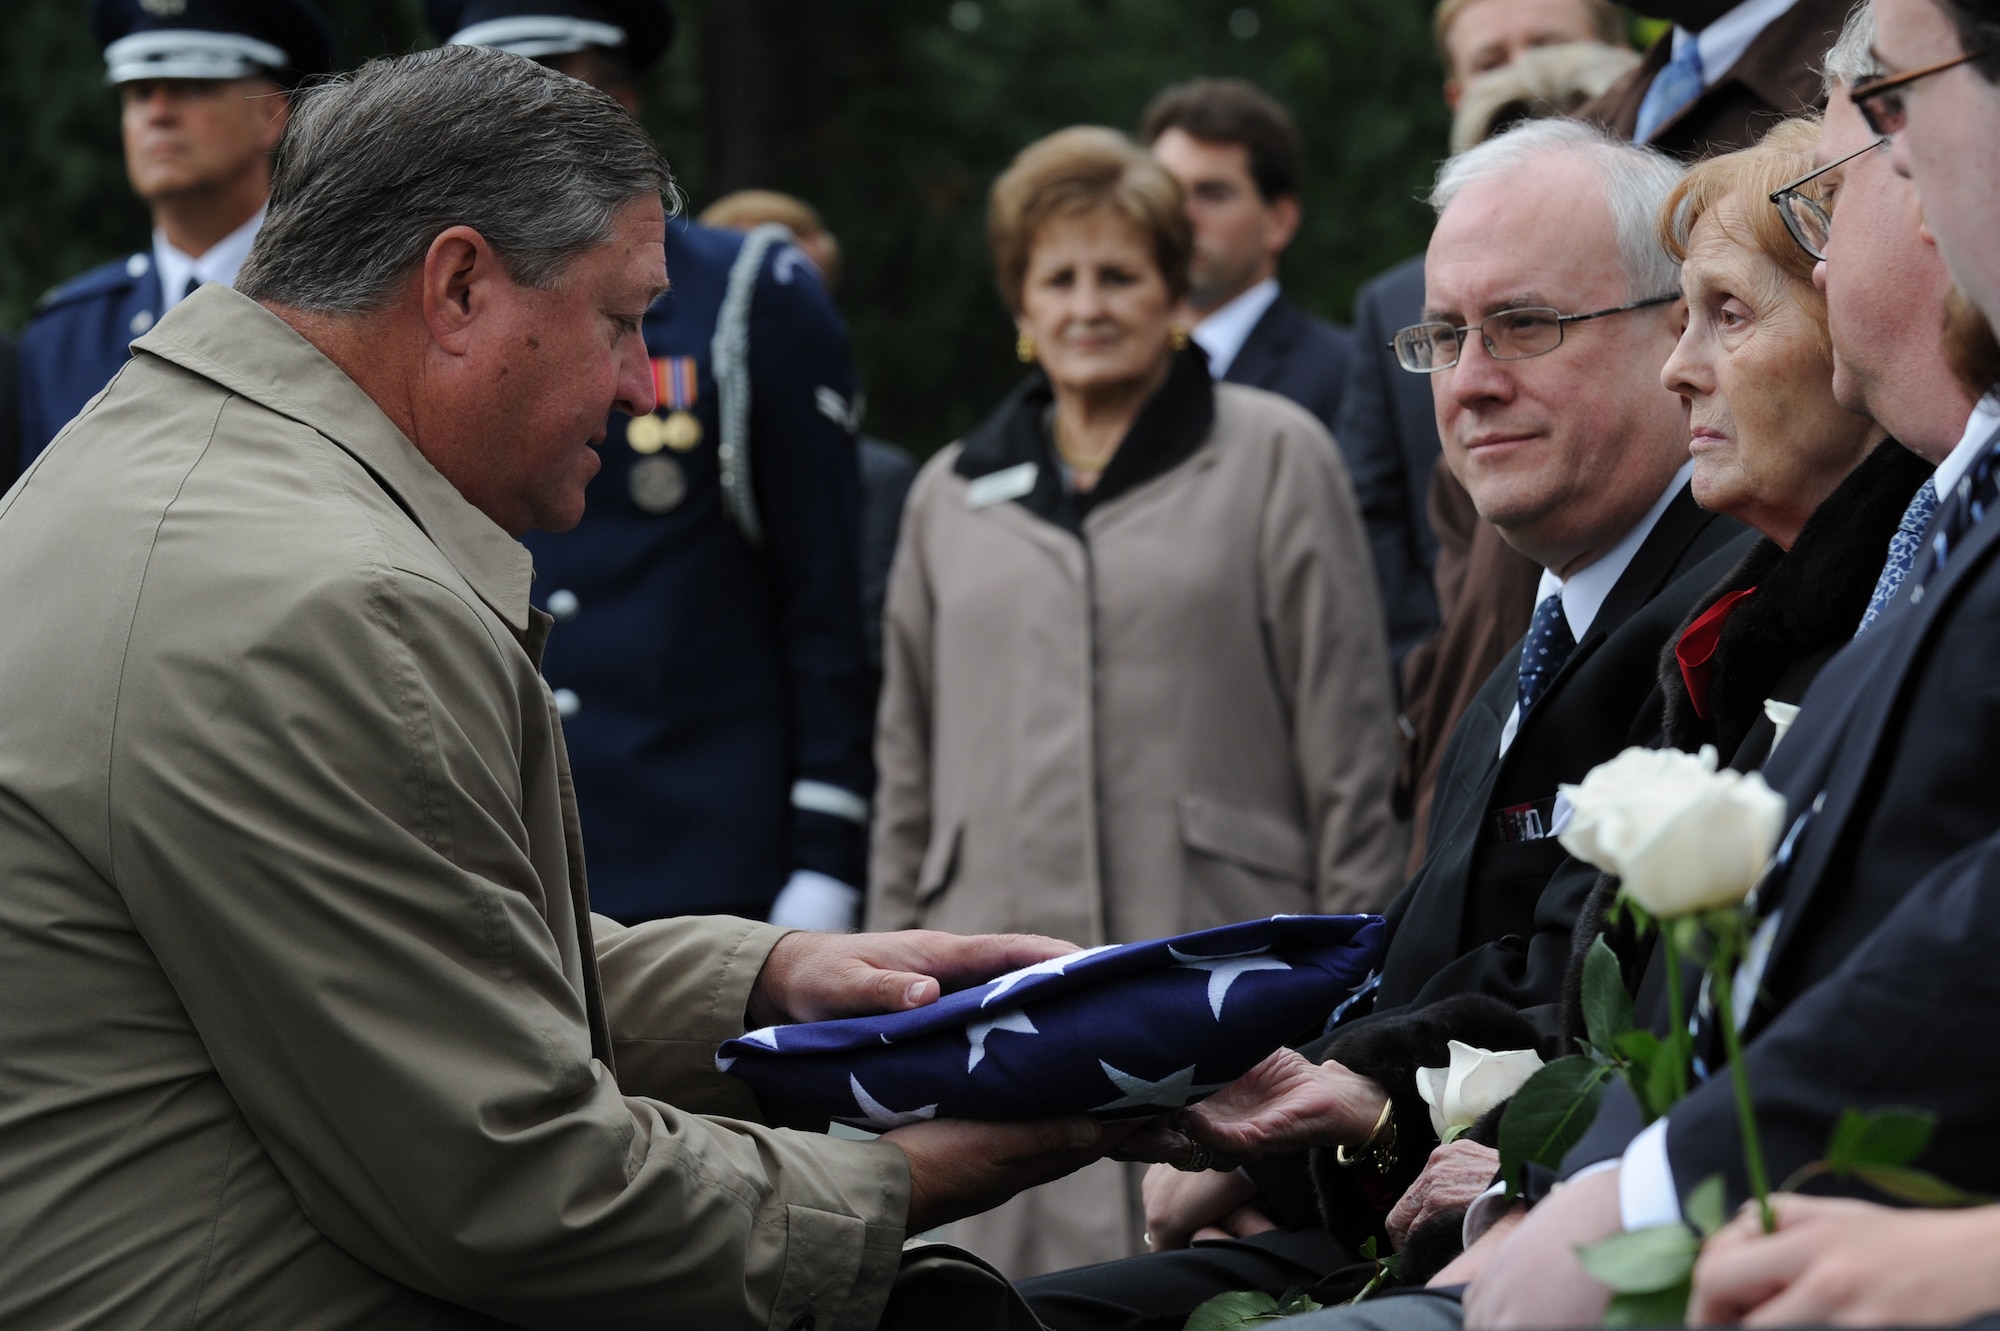 Secretary of the Air Force Michael Donley presents the American flag to Penni Alison during the funeral for retired Maj. Gen. John Alison at Arlington National Cemetery, Va., Oct. 3, 2011. Alison is often referred to as the father of Air Force special operations forces and was survived by his wife and two sons, John and David. (U.S. Air Force photo/Staff Sgt. Christopher Ruano)